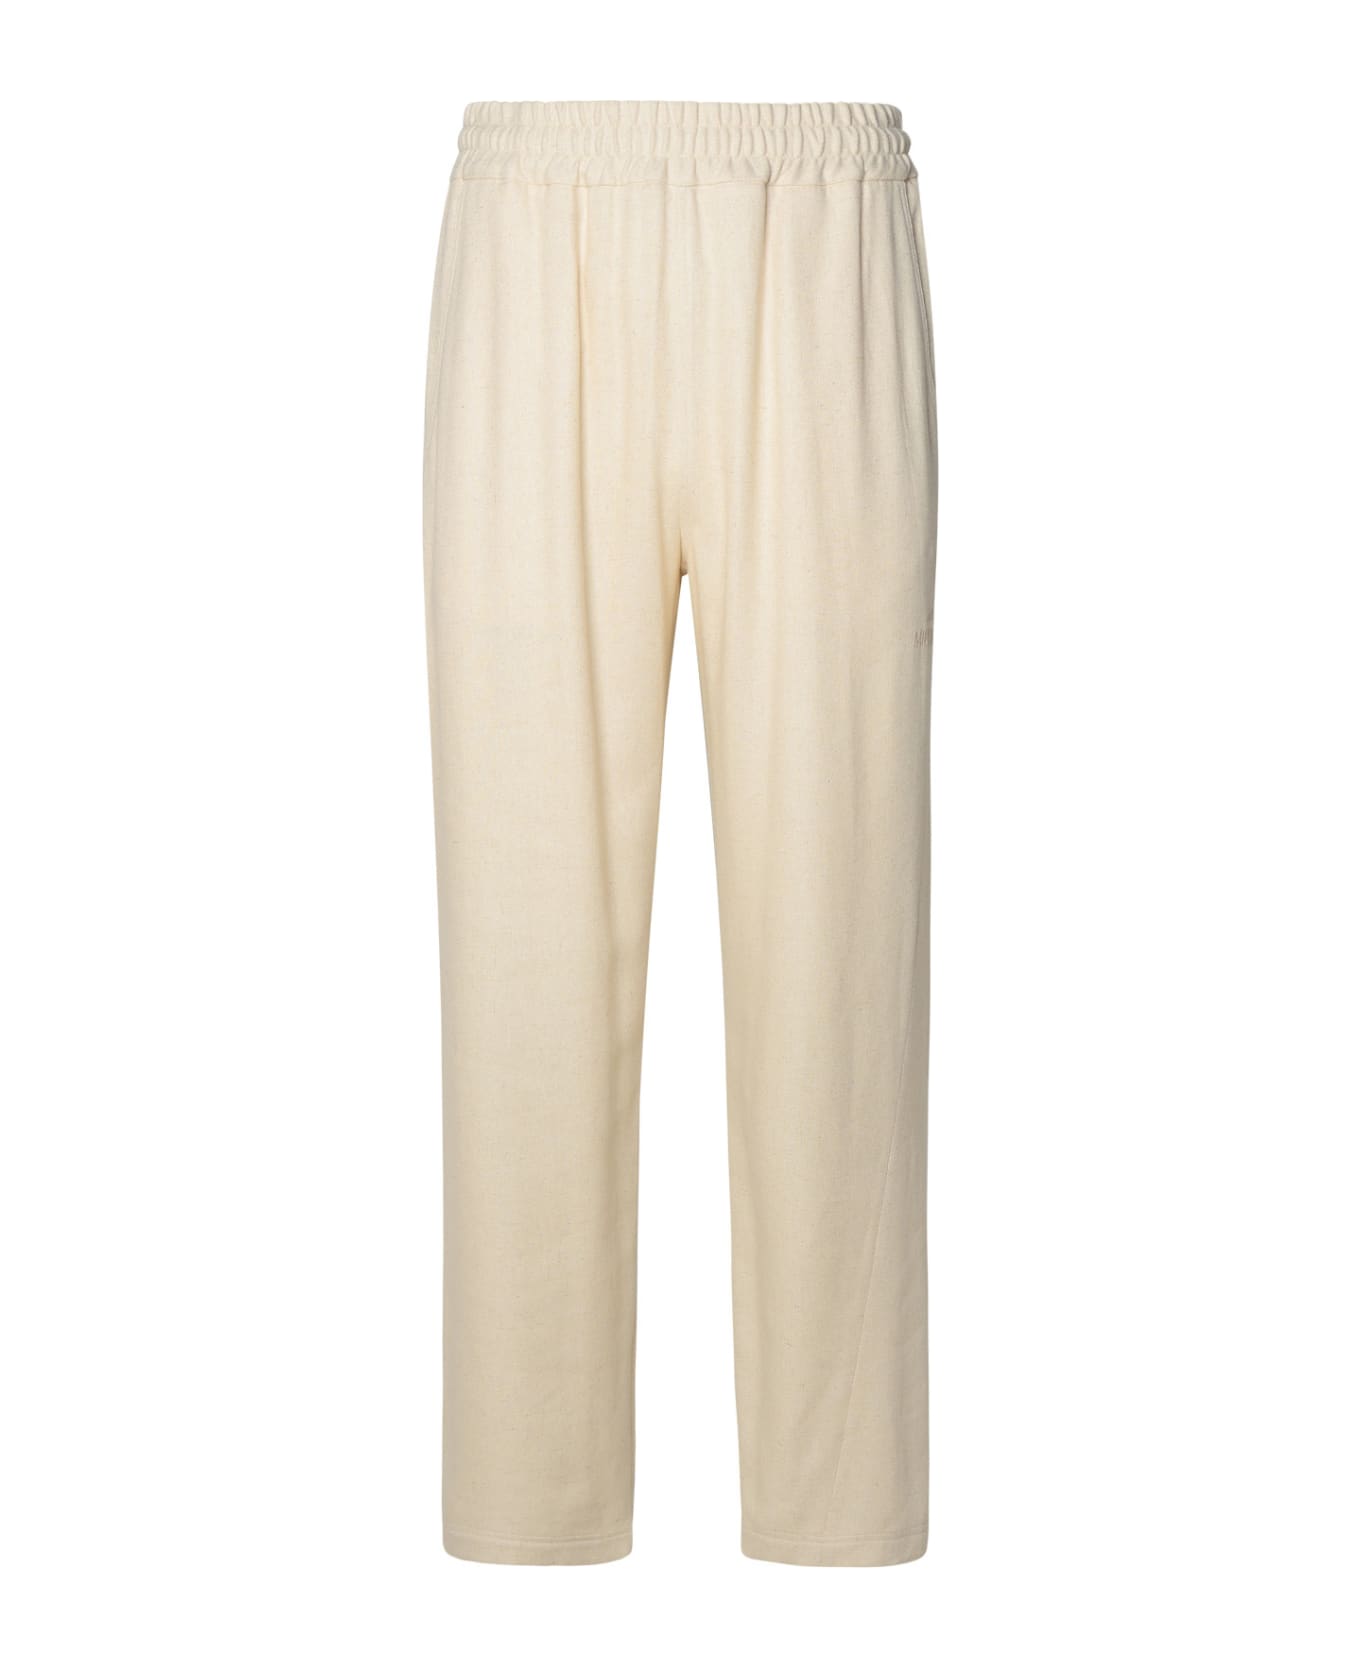 GCDS Ivory Linen Blend Club Trousers - Off White